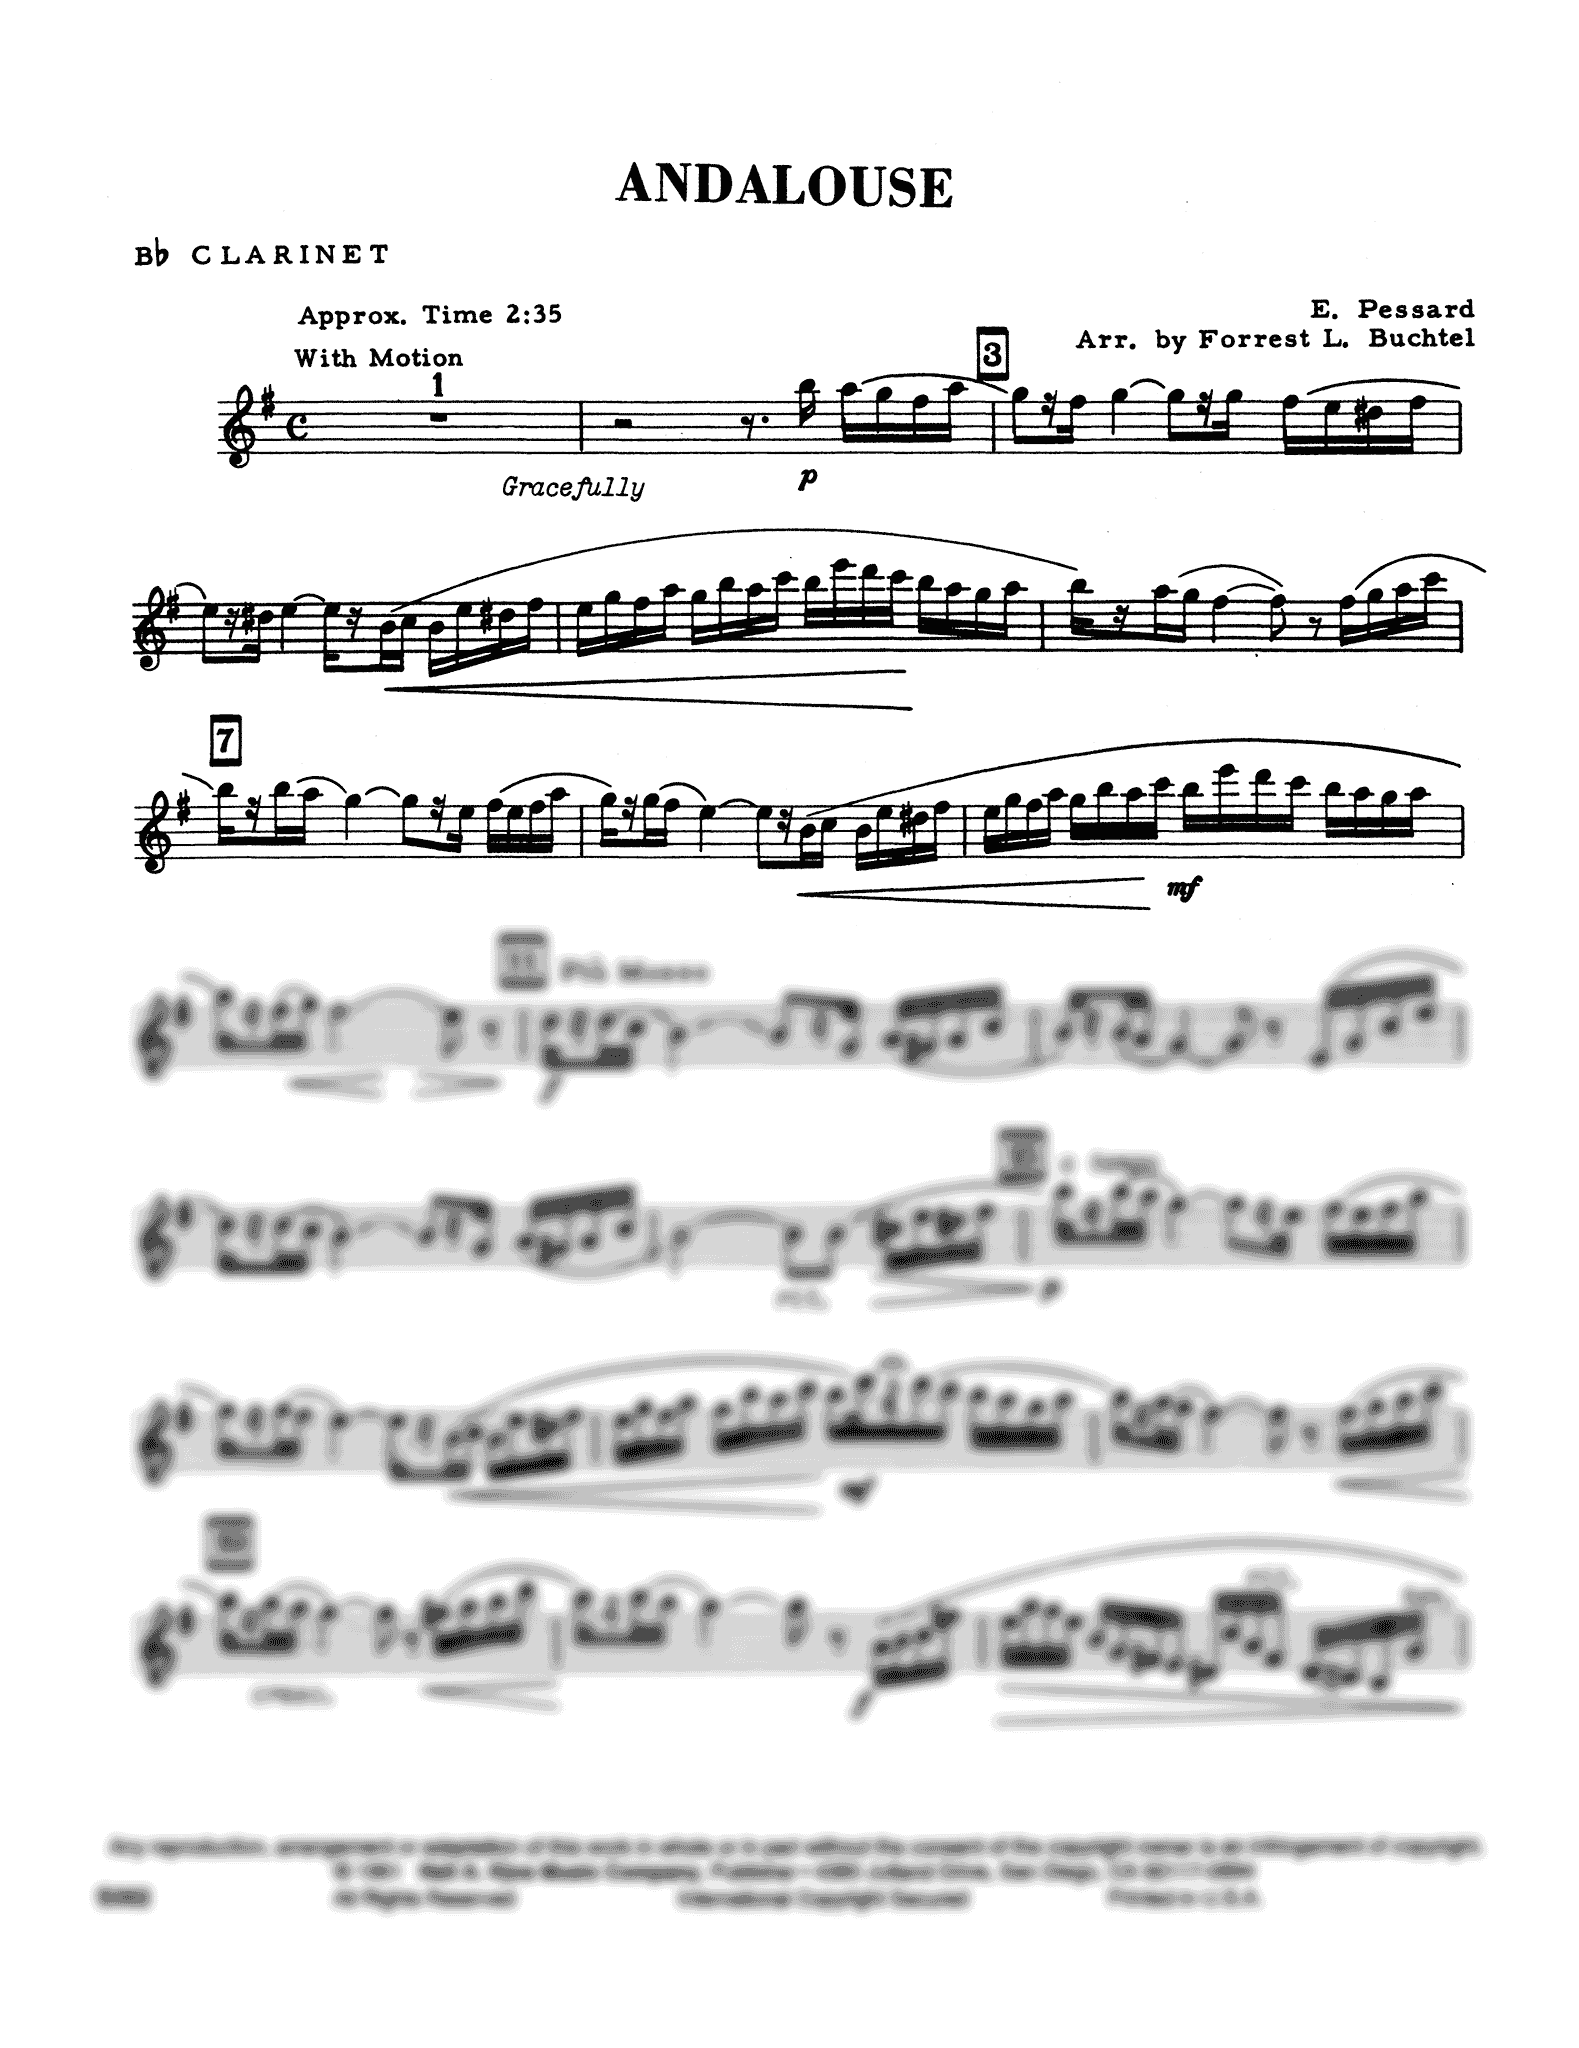 Andalouse, from 25 Pièces pour piano, Op. 20 Clarinet part